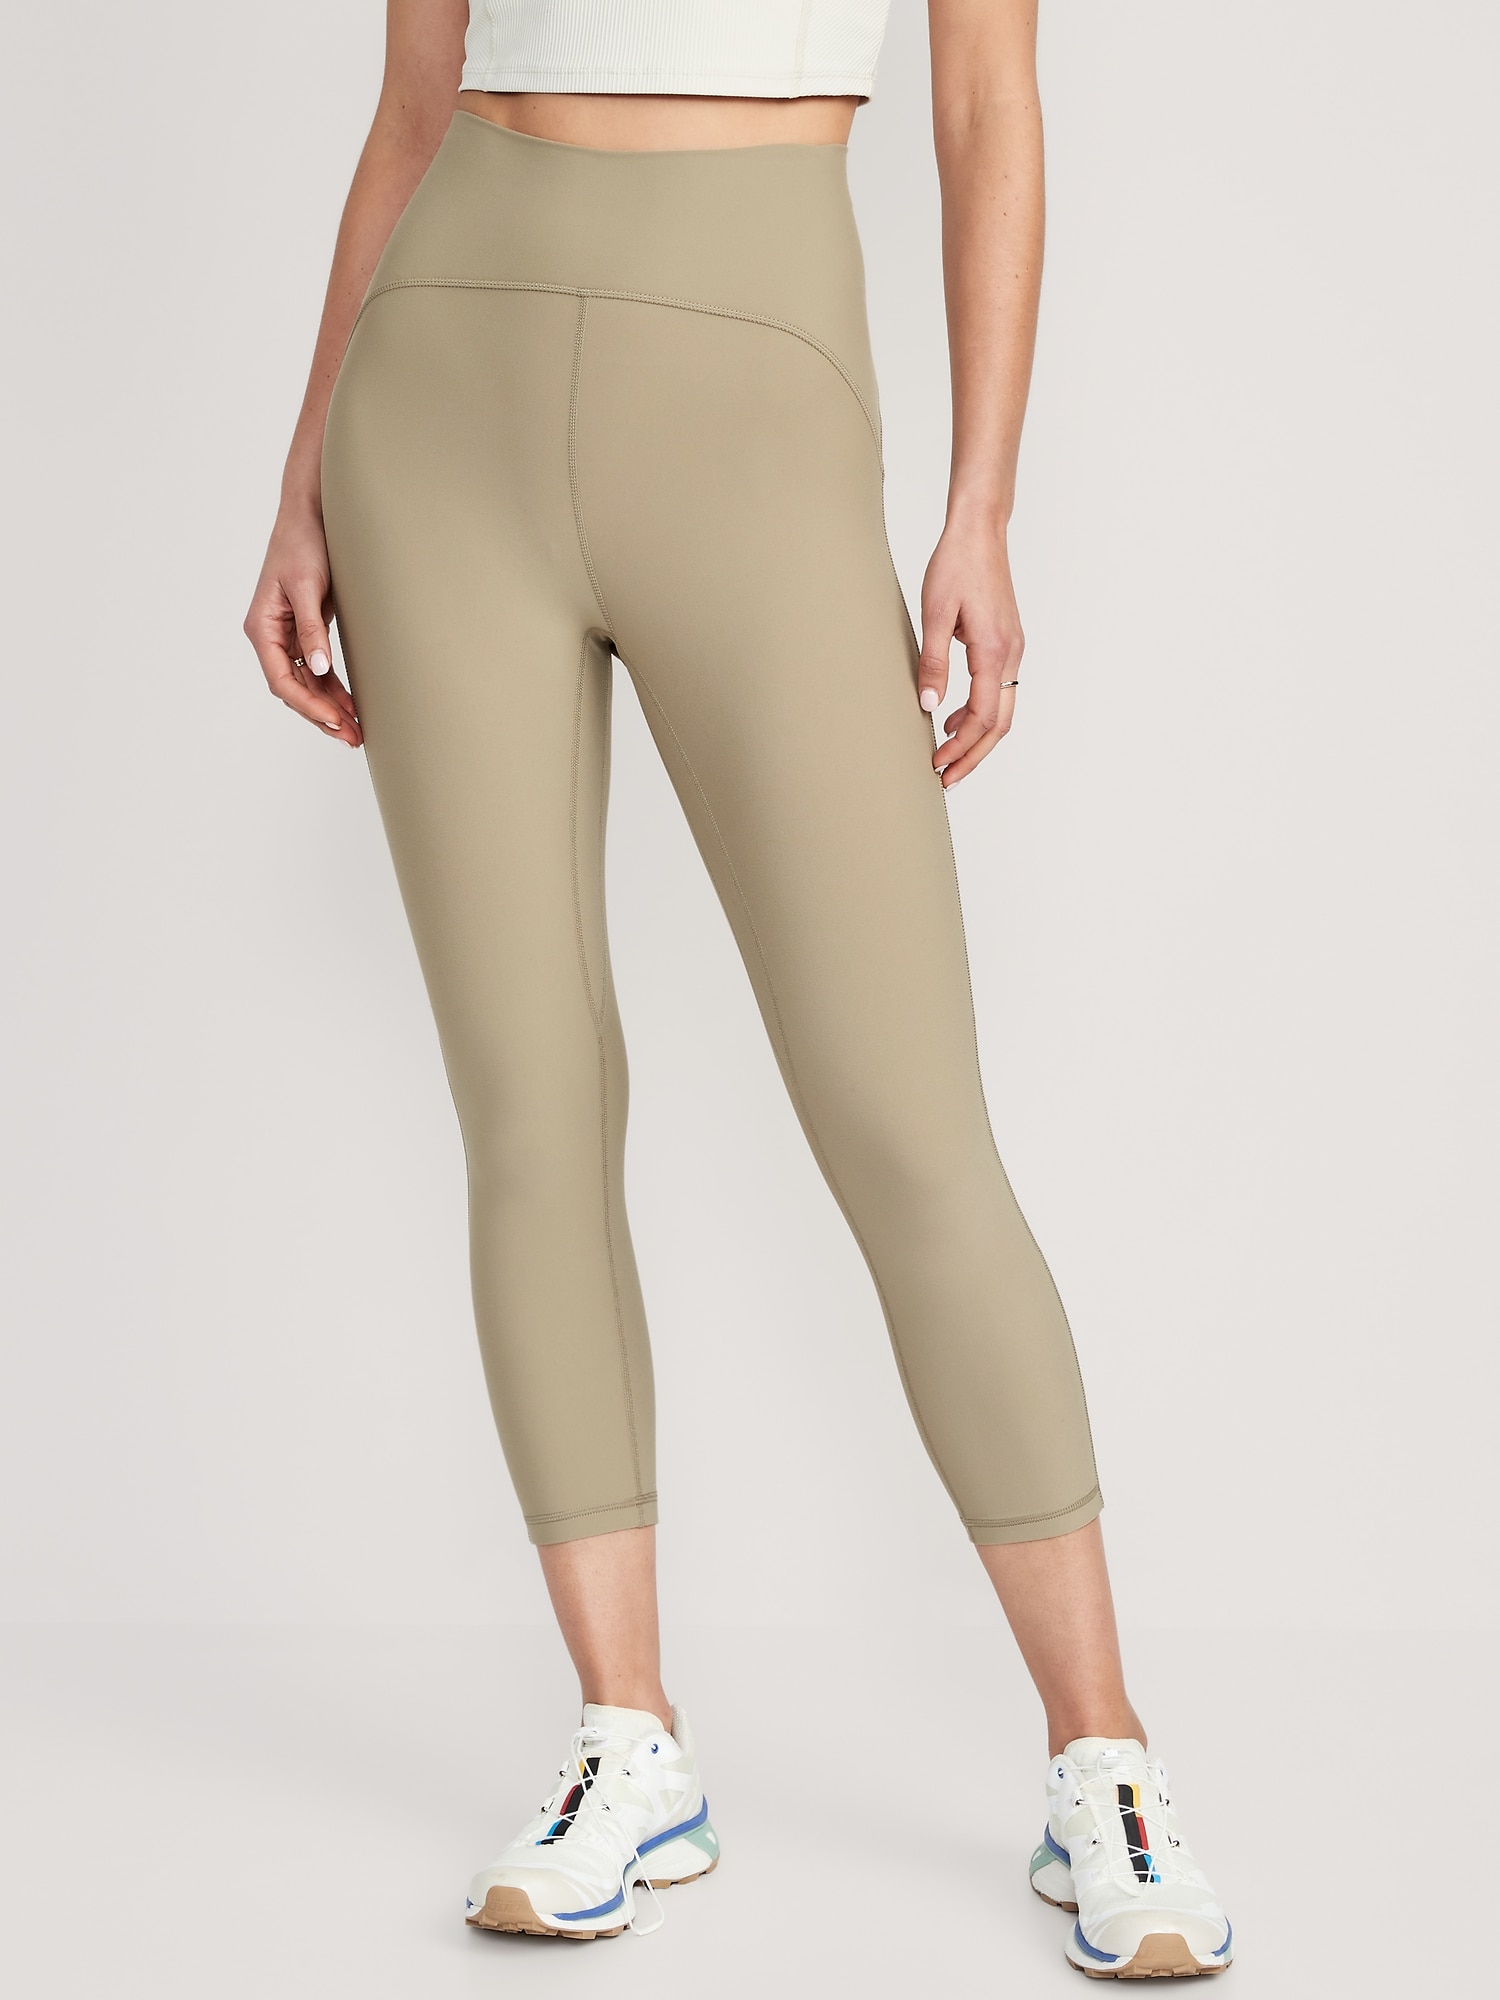 Old Navy Extra High-Waisted PowerLite Lycra® ADAPTIV Cropped Leggings for Women beige. 1